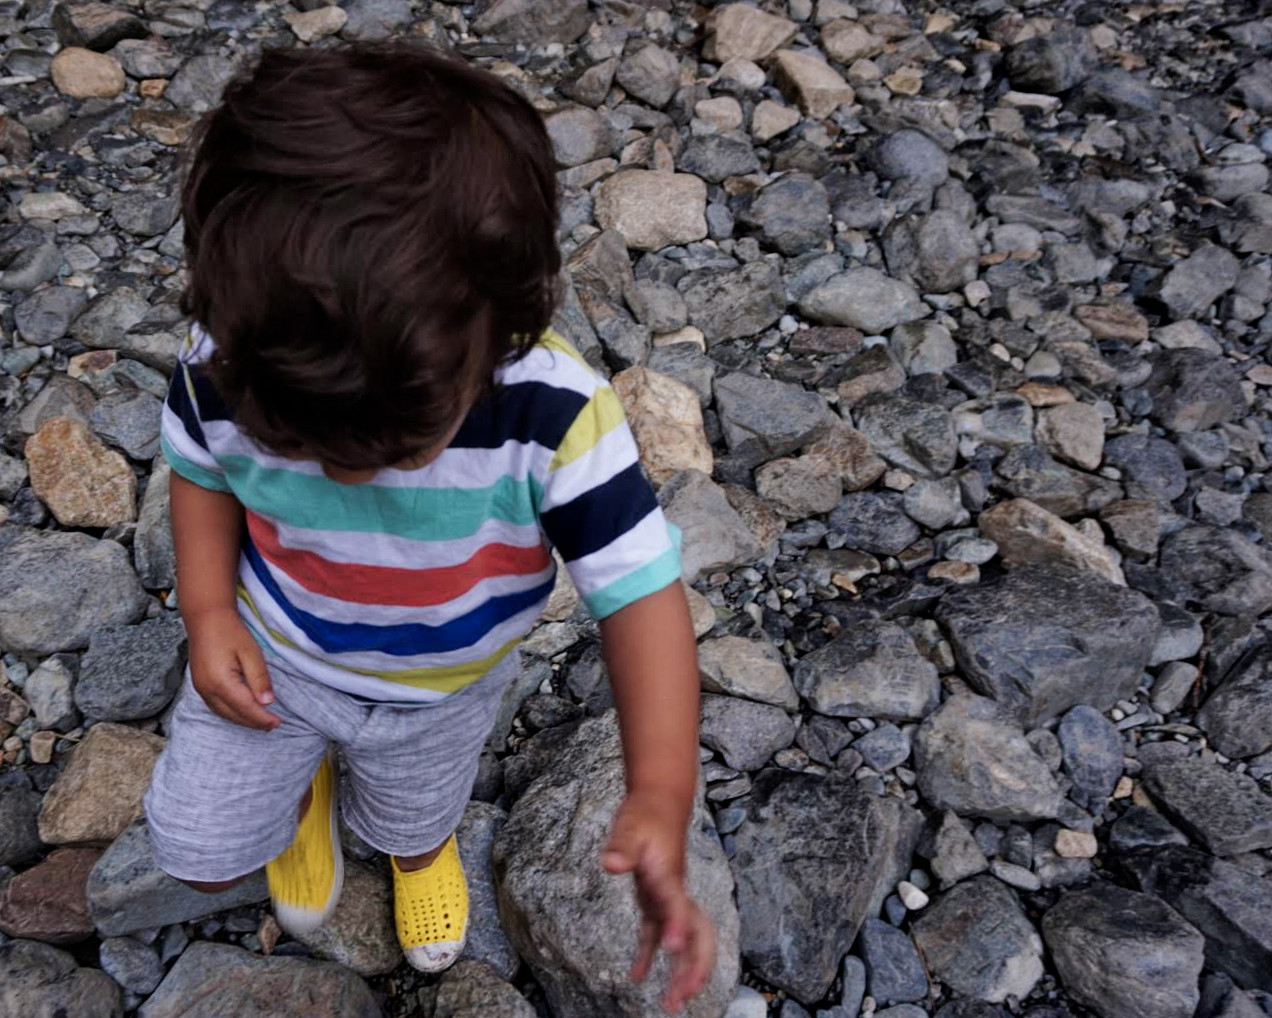  Elden (2 years old) playing with rocks near the waterfall 